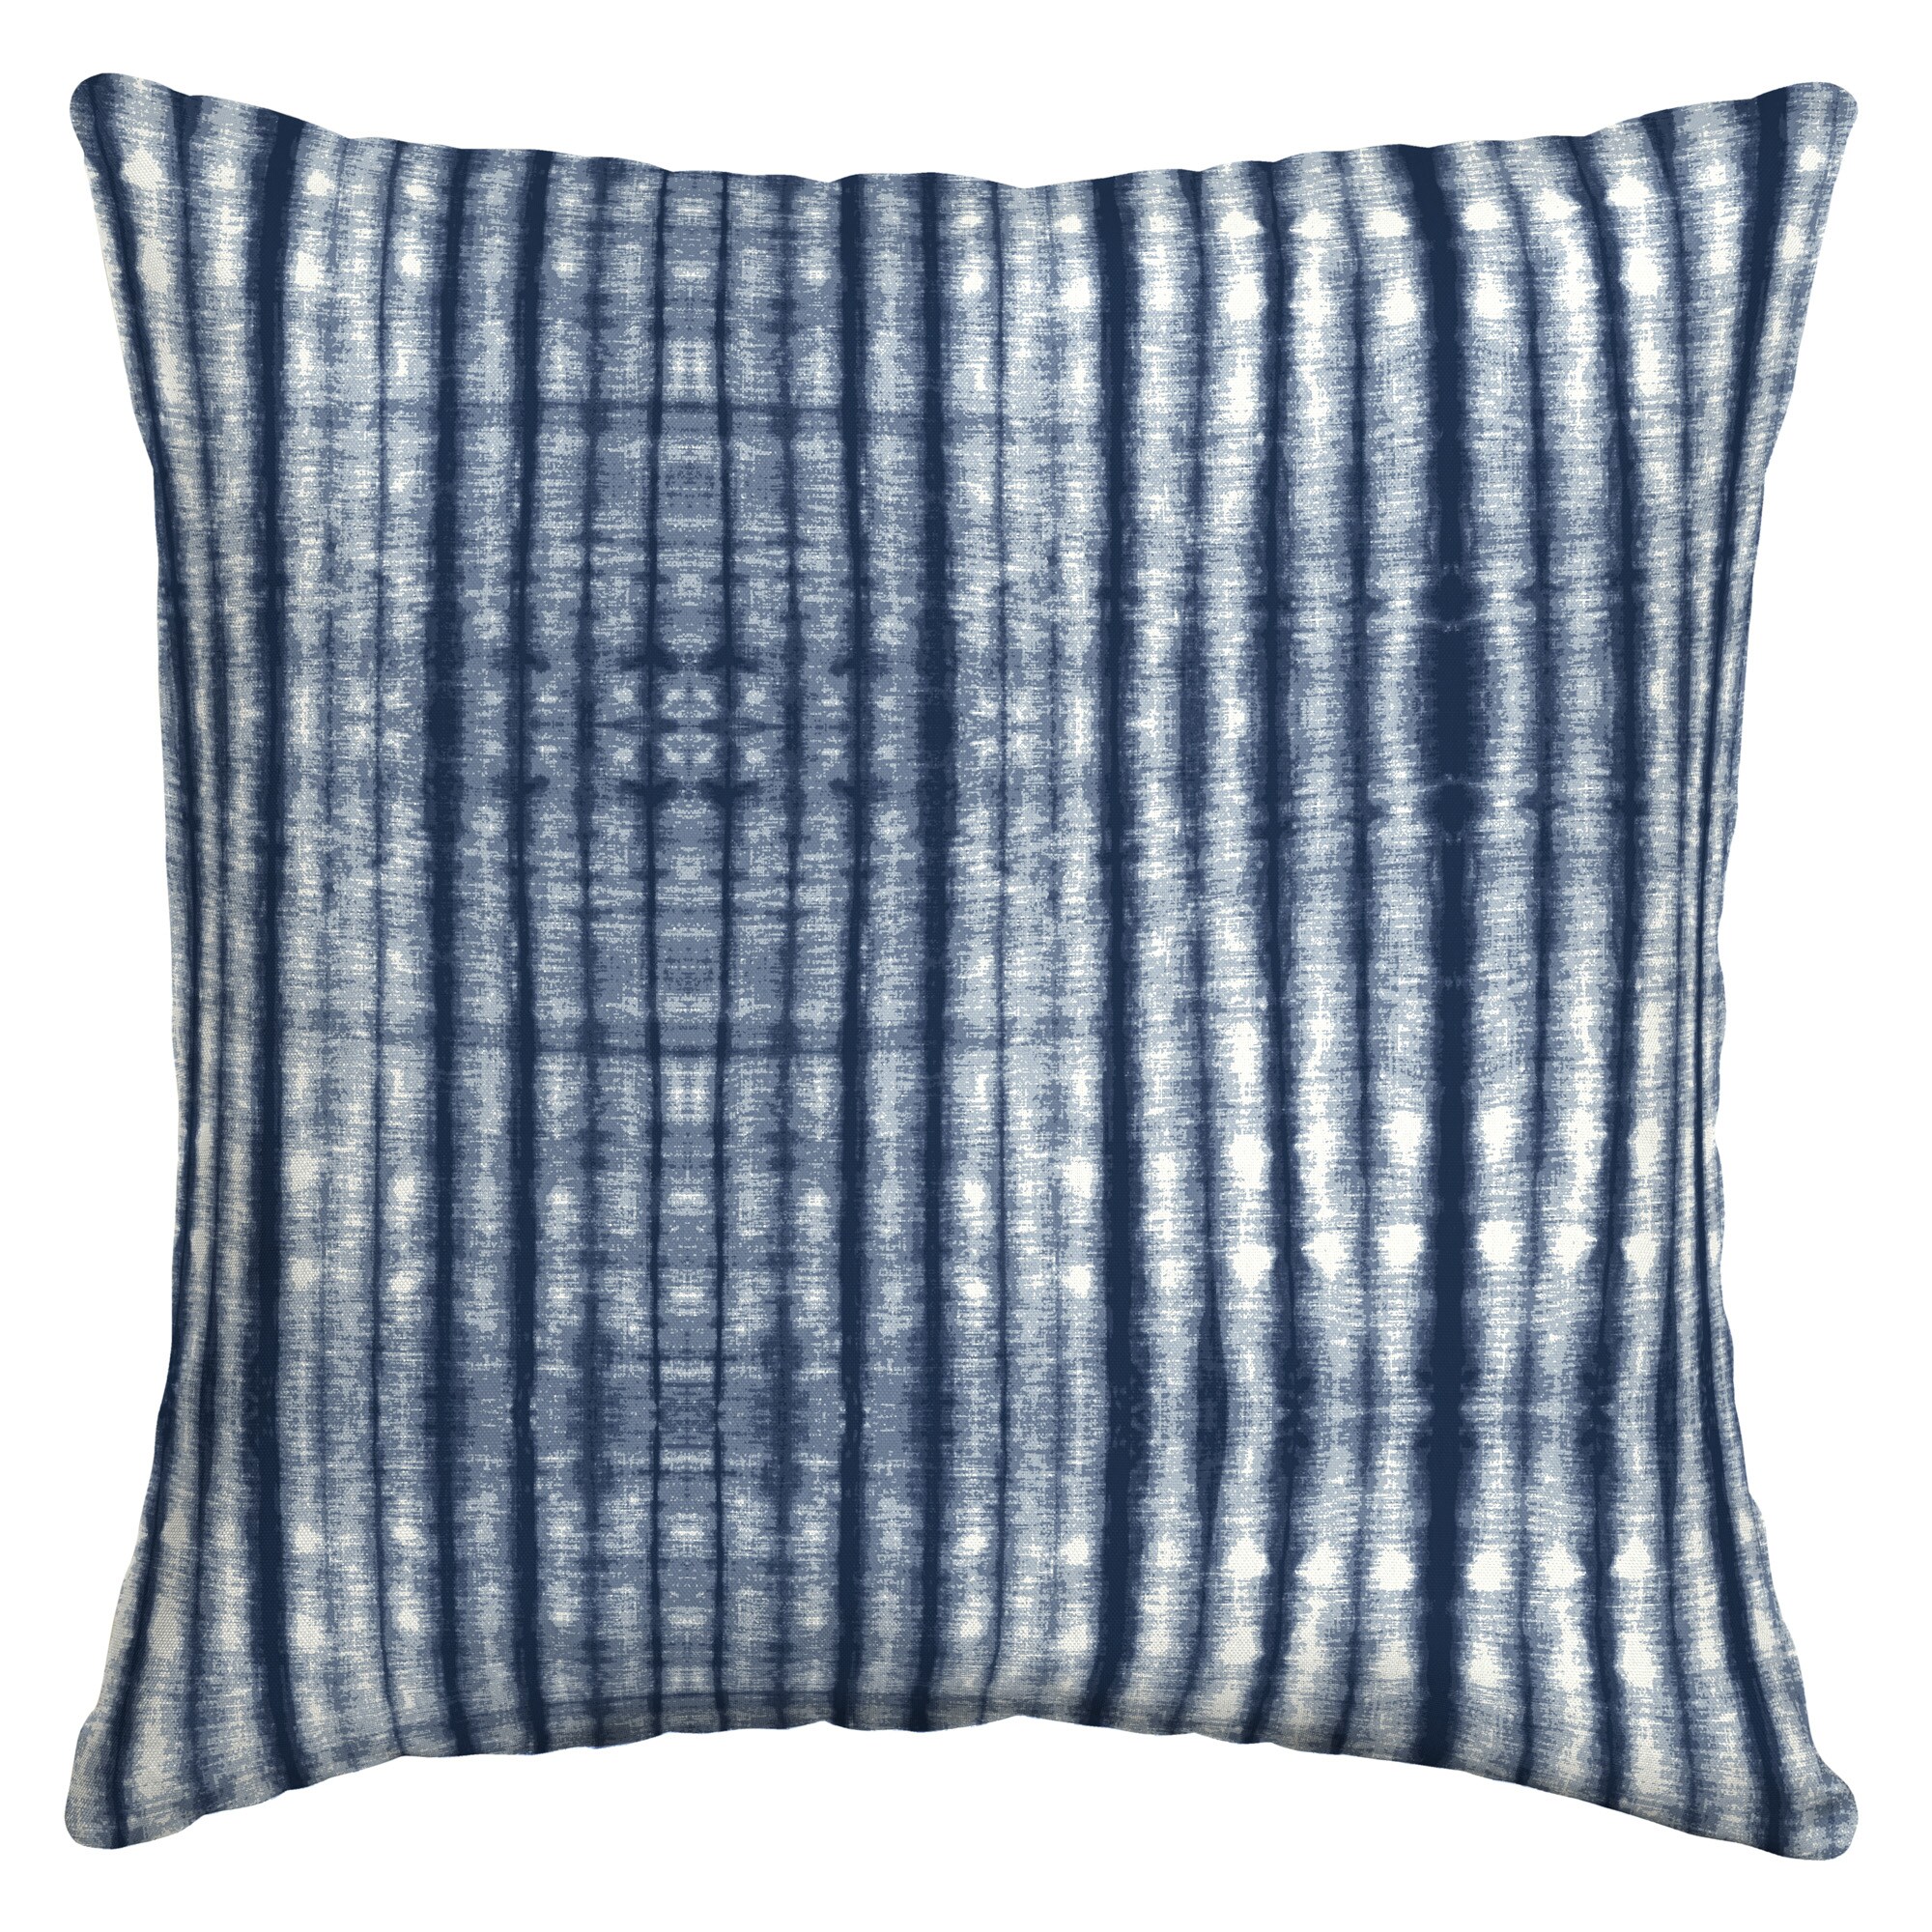 Arden Selections 16 in. x 16 in. Blue Shibori Stripe Outdoor Square Throw Pillow (2-Pack)